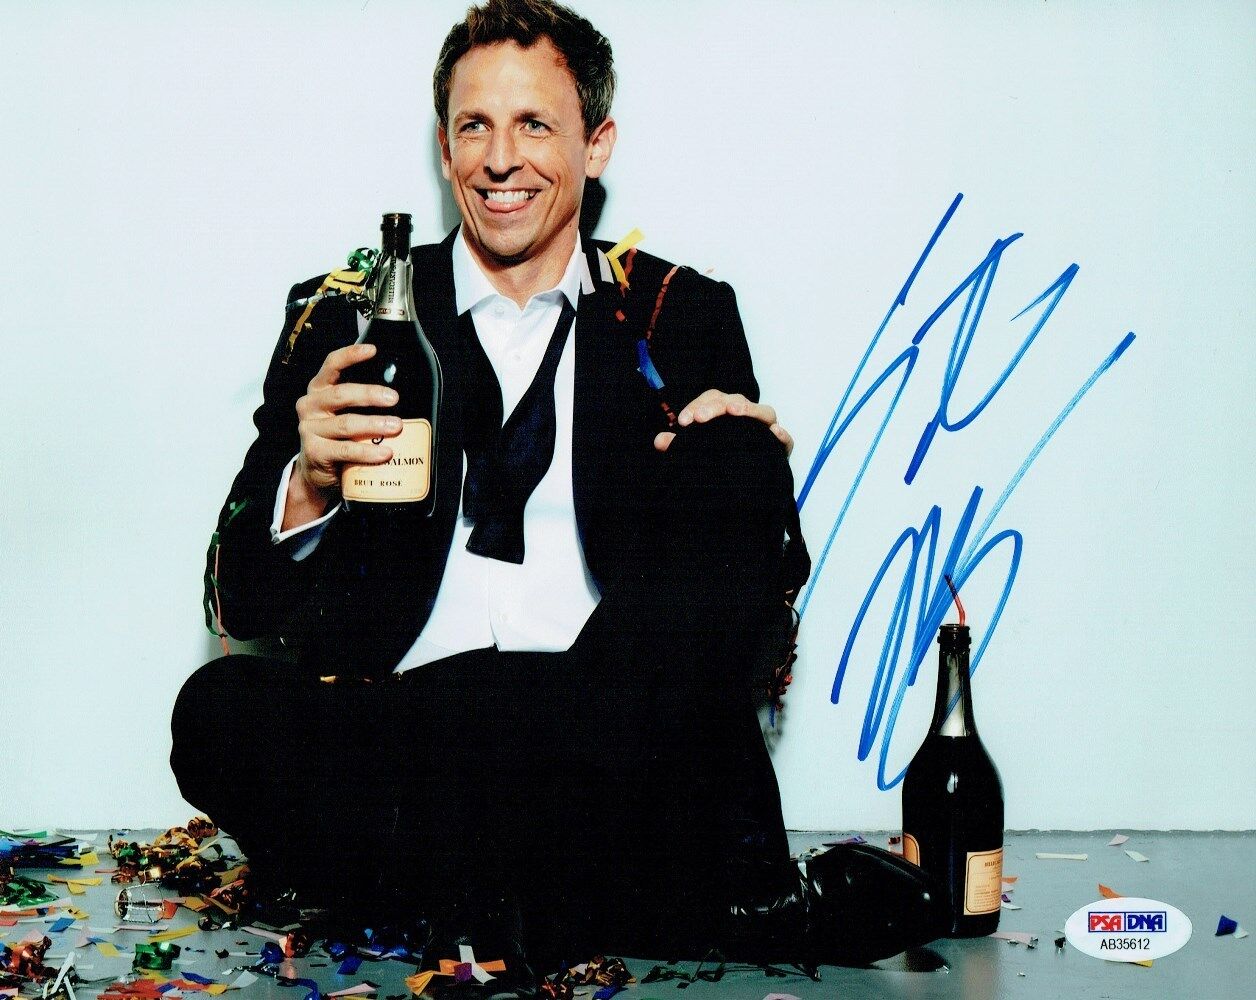 Seth Meyers Signed Authentic Autographed 8x10 Photo Poster painting PSA/DNA #AB35612